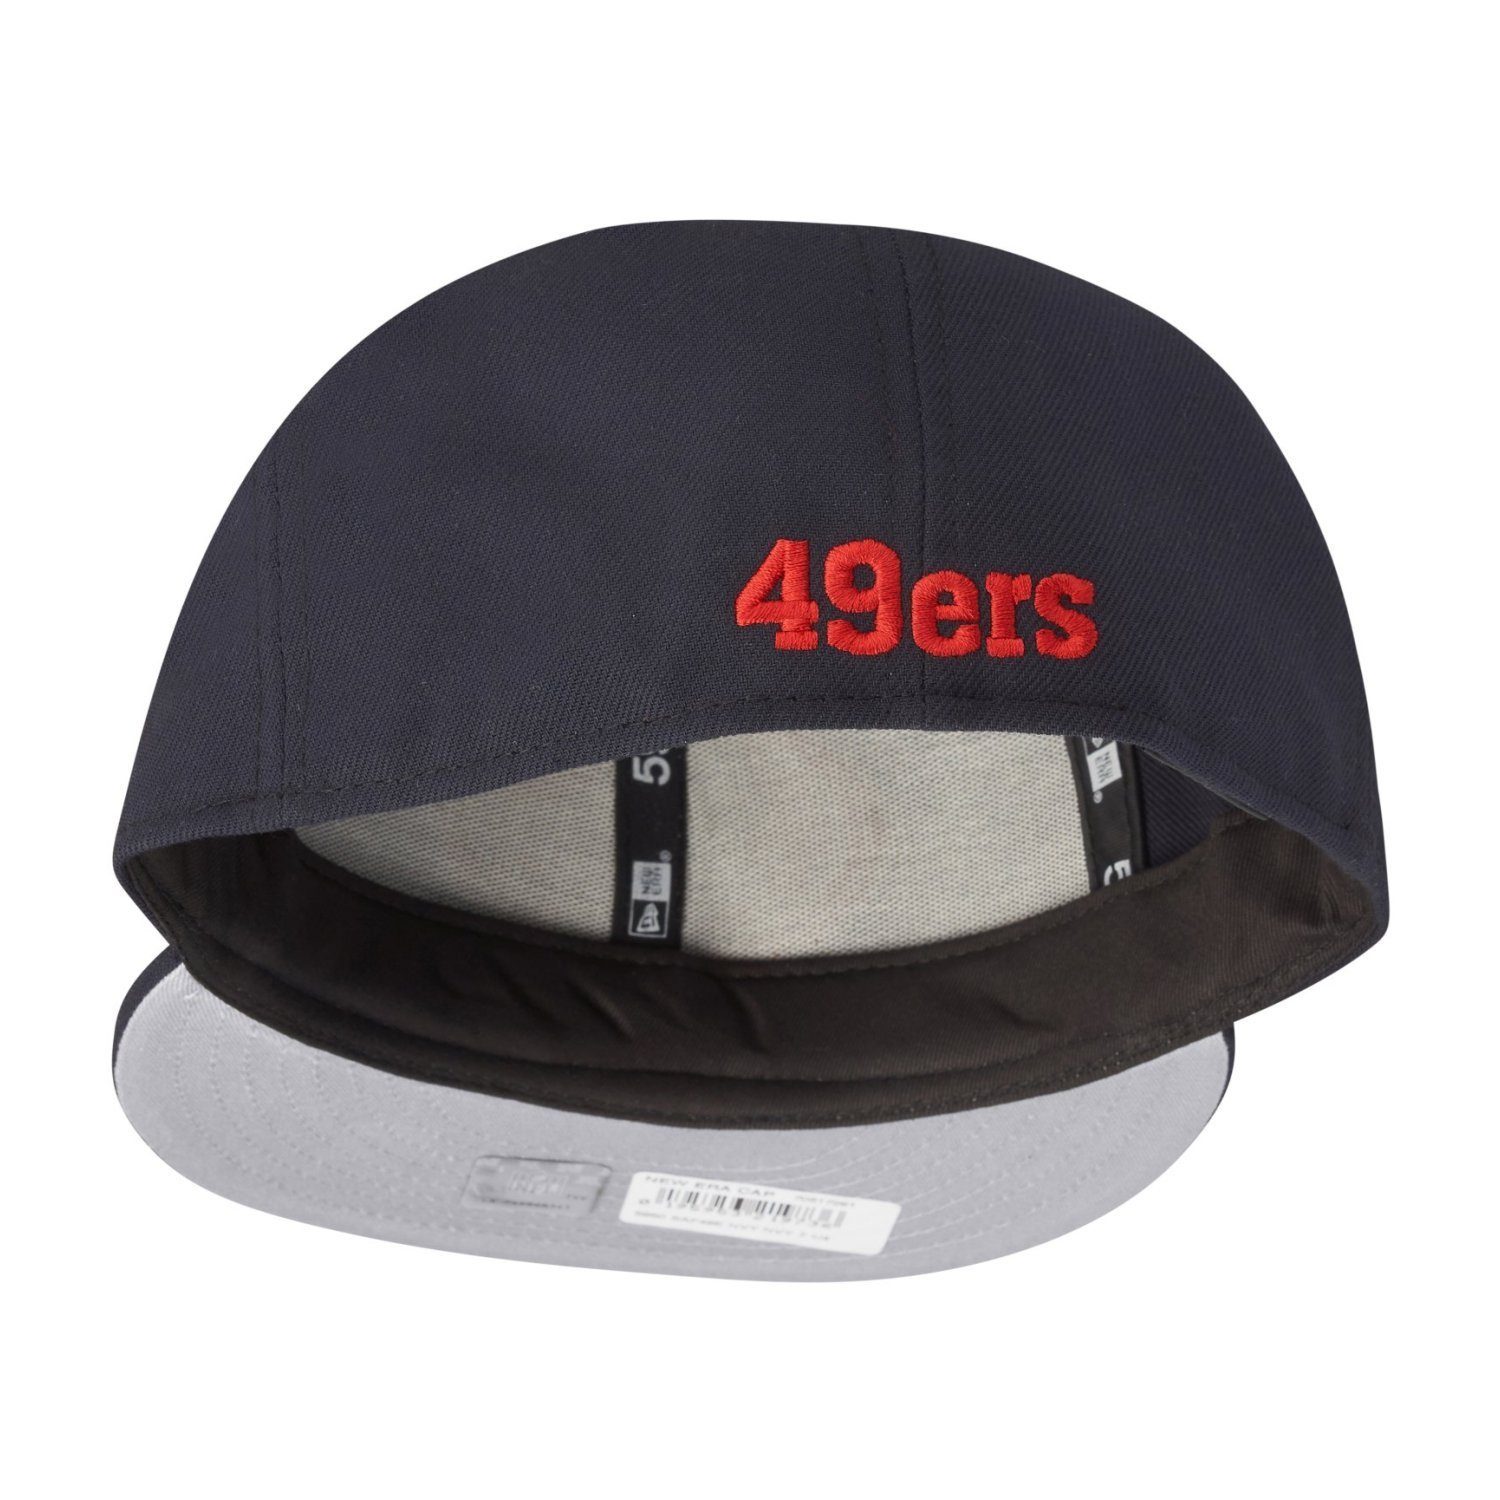 New Era Fitted Cap TEAMS 49ers San red 59Fifty NFL Francisco